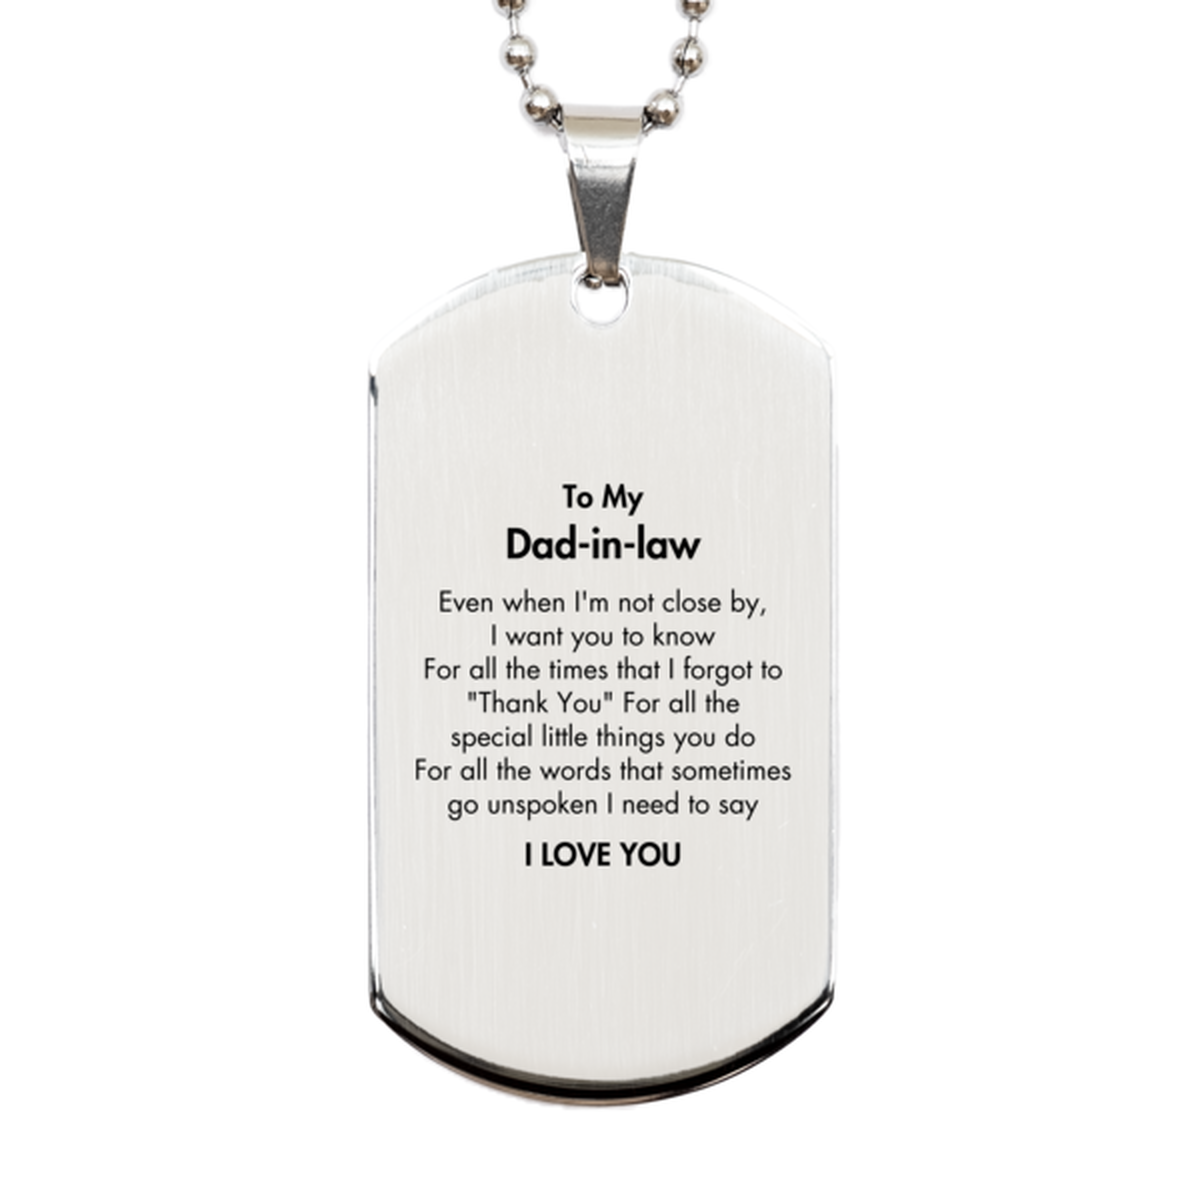 Thank You Gifts for Dad-in-law, Keepsake Silver Dog Tag Gifts for Dad-in-law Birthday Mother's day Father's Day Dad-in-law For all the words That sometimes go unspoken I need to say I LOVE YOU